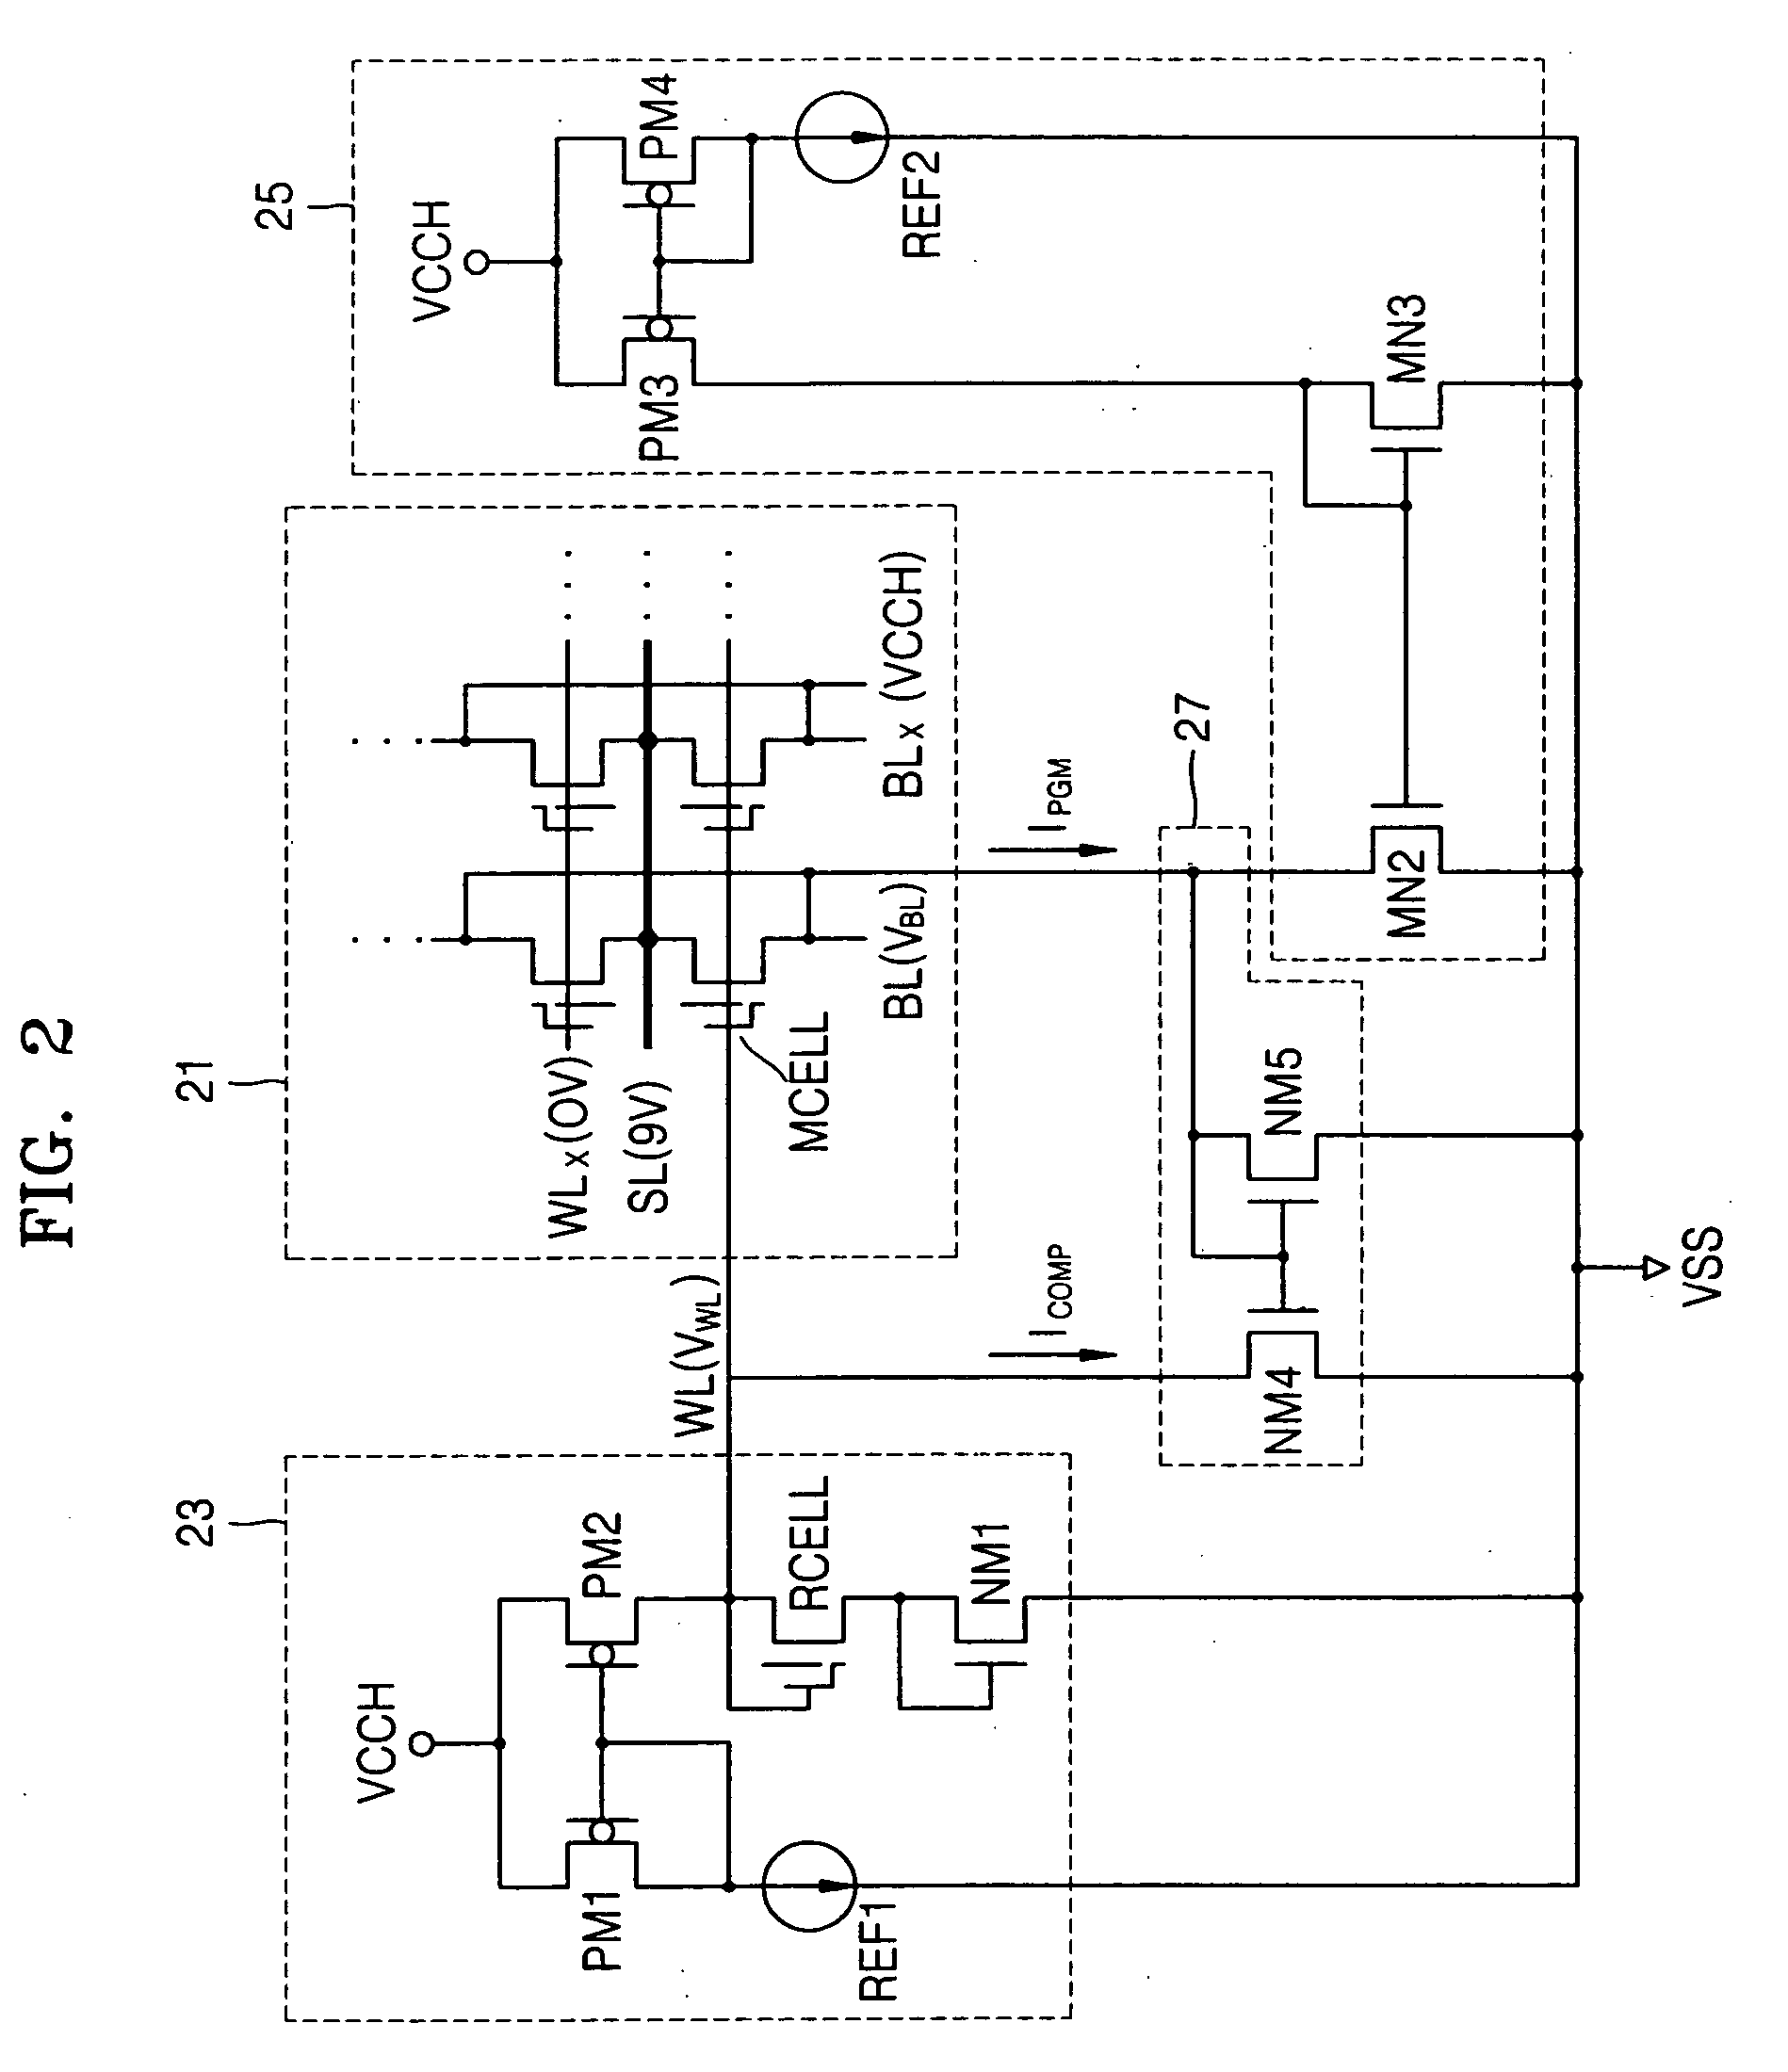 Flash memory device including bit line voltage clamp circuit for controlling bit line voltage during programming, and bit line voltage control method thereof